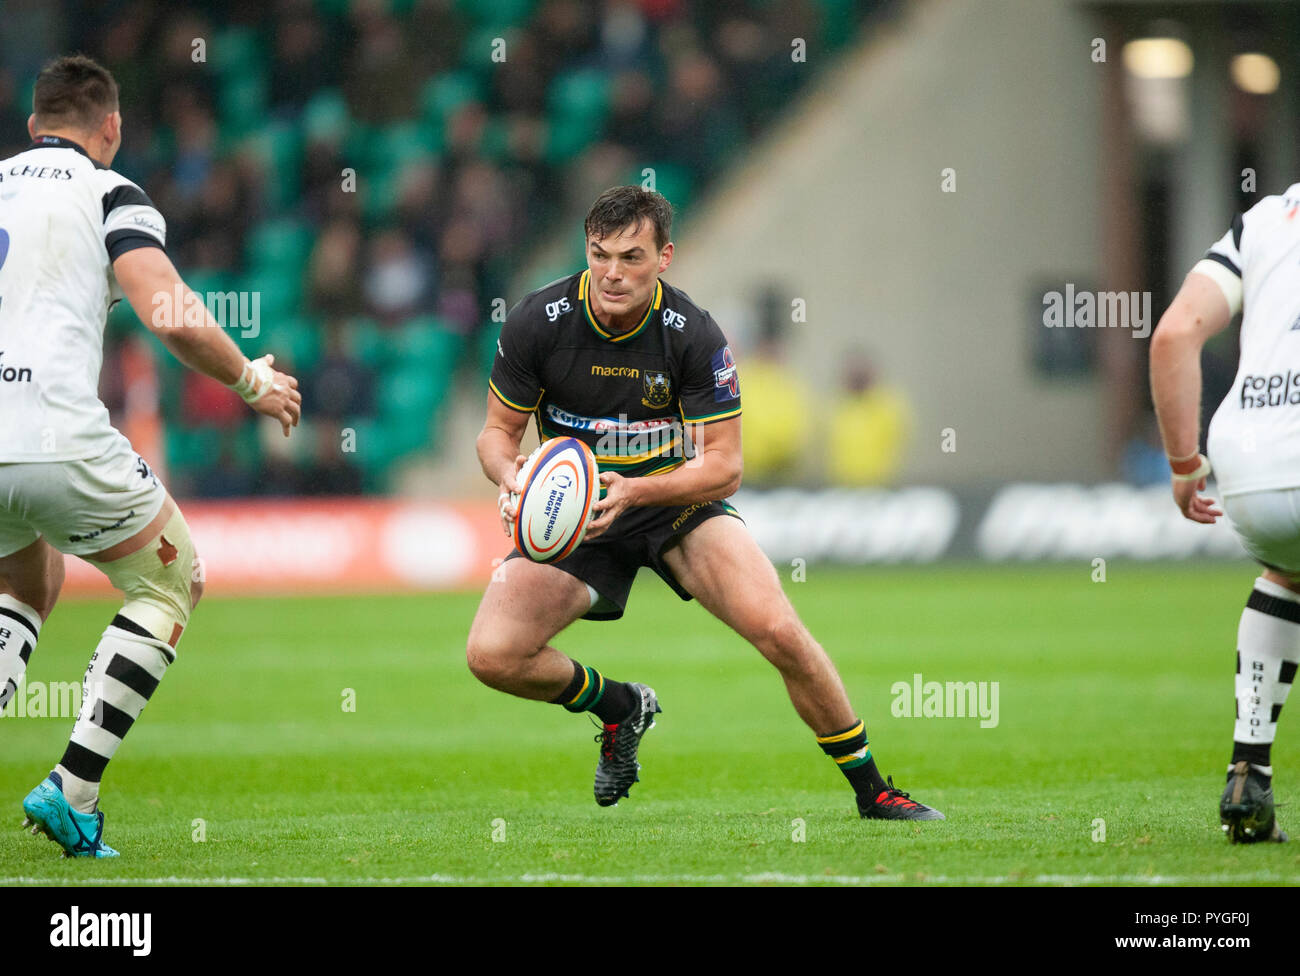 Northampton, UK. 27th October 2018. George Furbank of Northampton Saints during the Premiership Rugby Cup match between Northampton Saints and Bristol Bears. Andrew Taylor/Alamy Live News Stock Photo